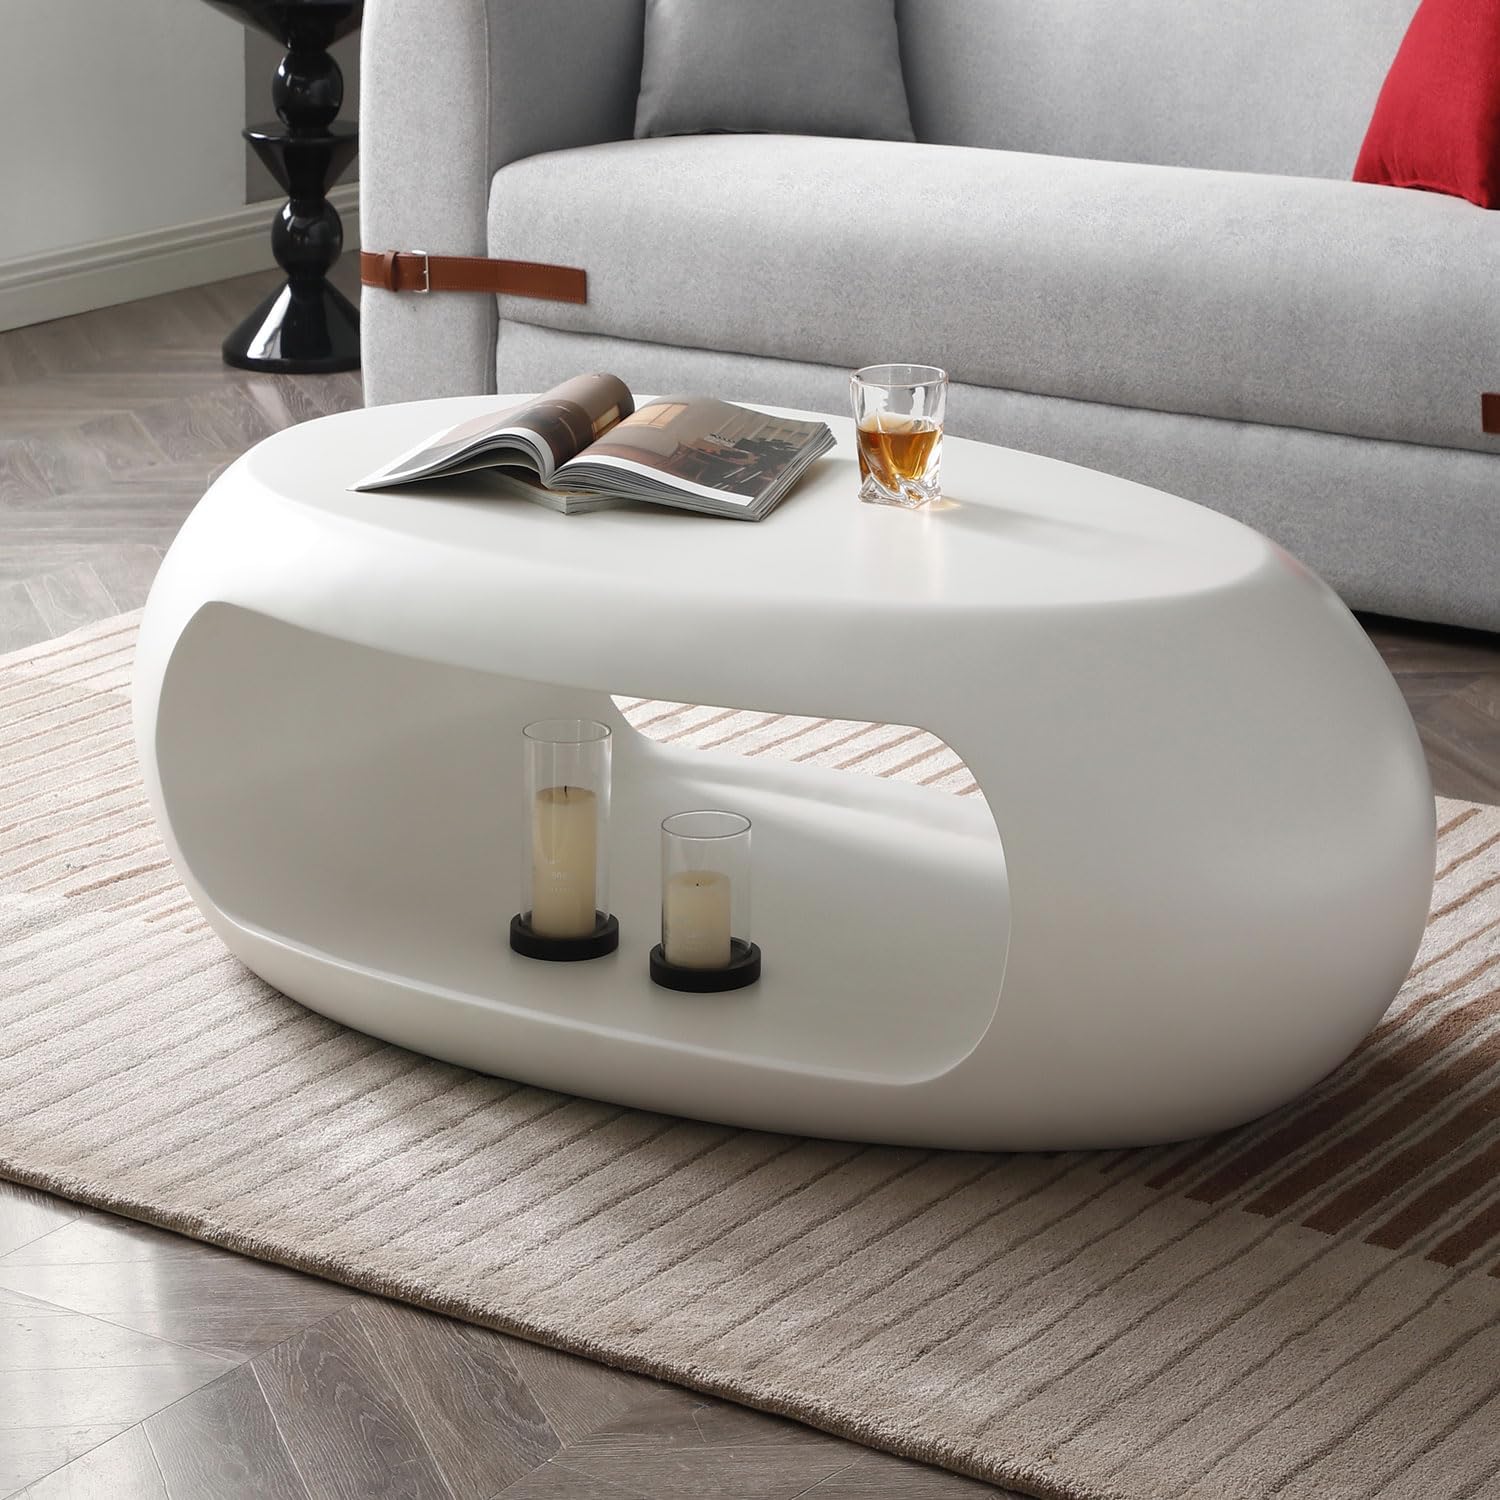 WILLIAMSPACE 39.37 Modern White Oval Coffee Table with Storage for Living Room, Fiberglass Coffee Table, Double Layer Coffee Table Side Table End Table, No Assembly, 39.37*17.32*17.32 (White)